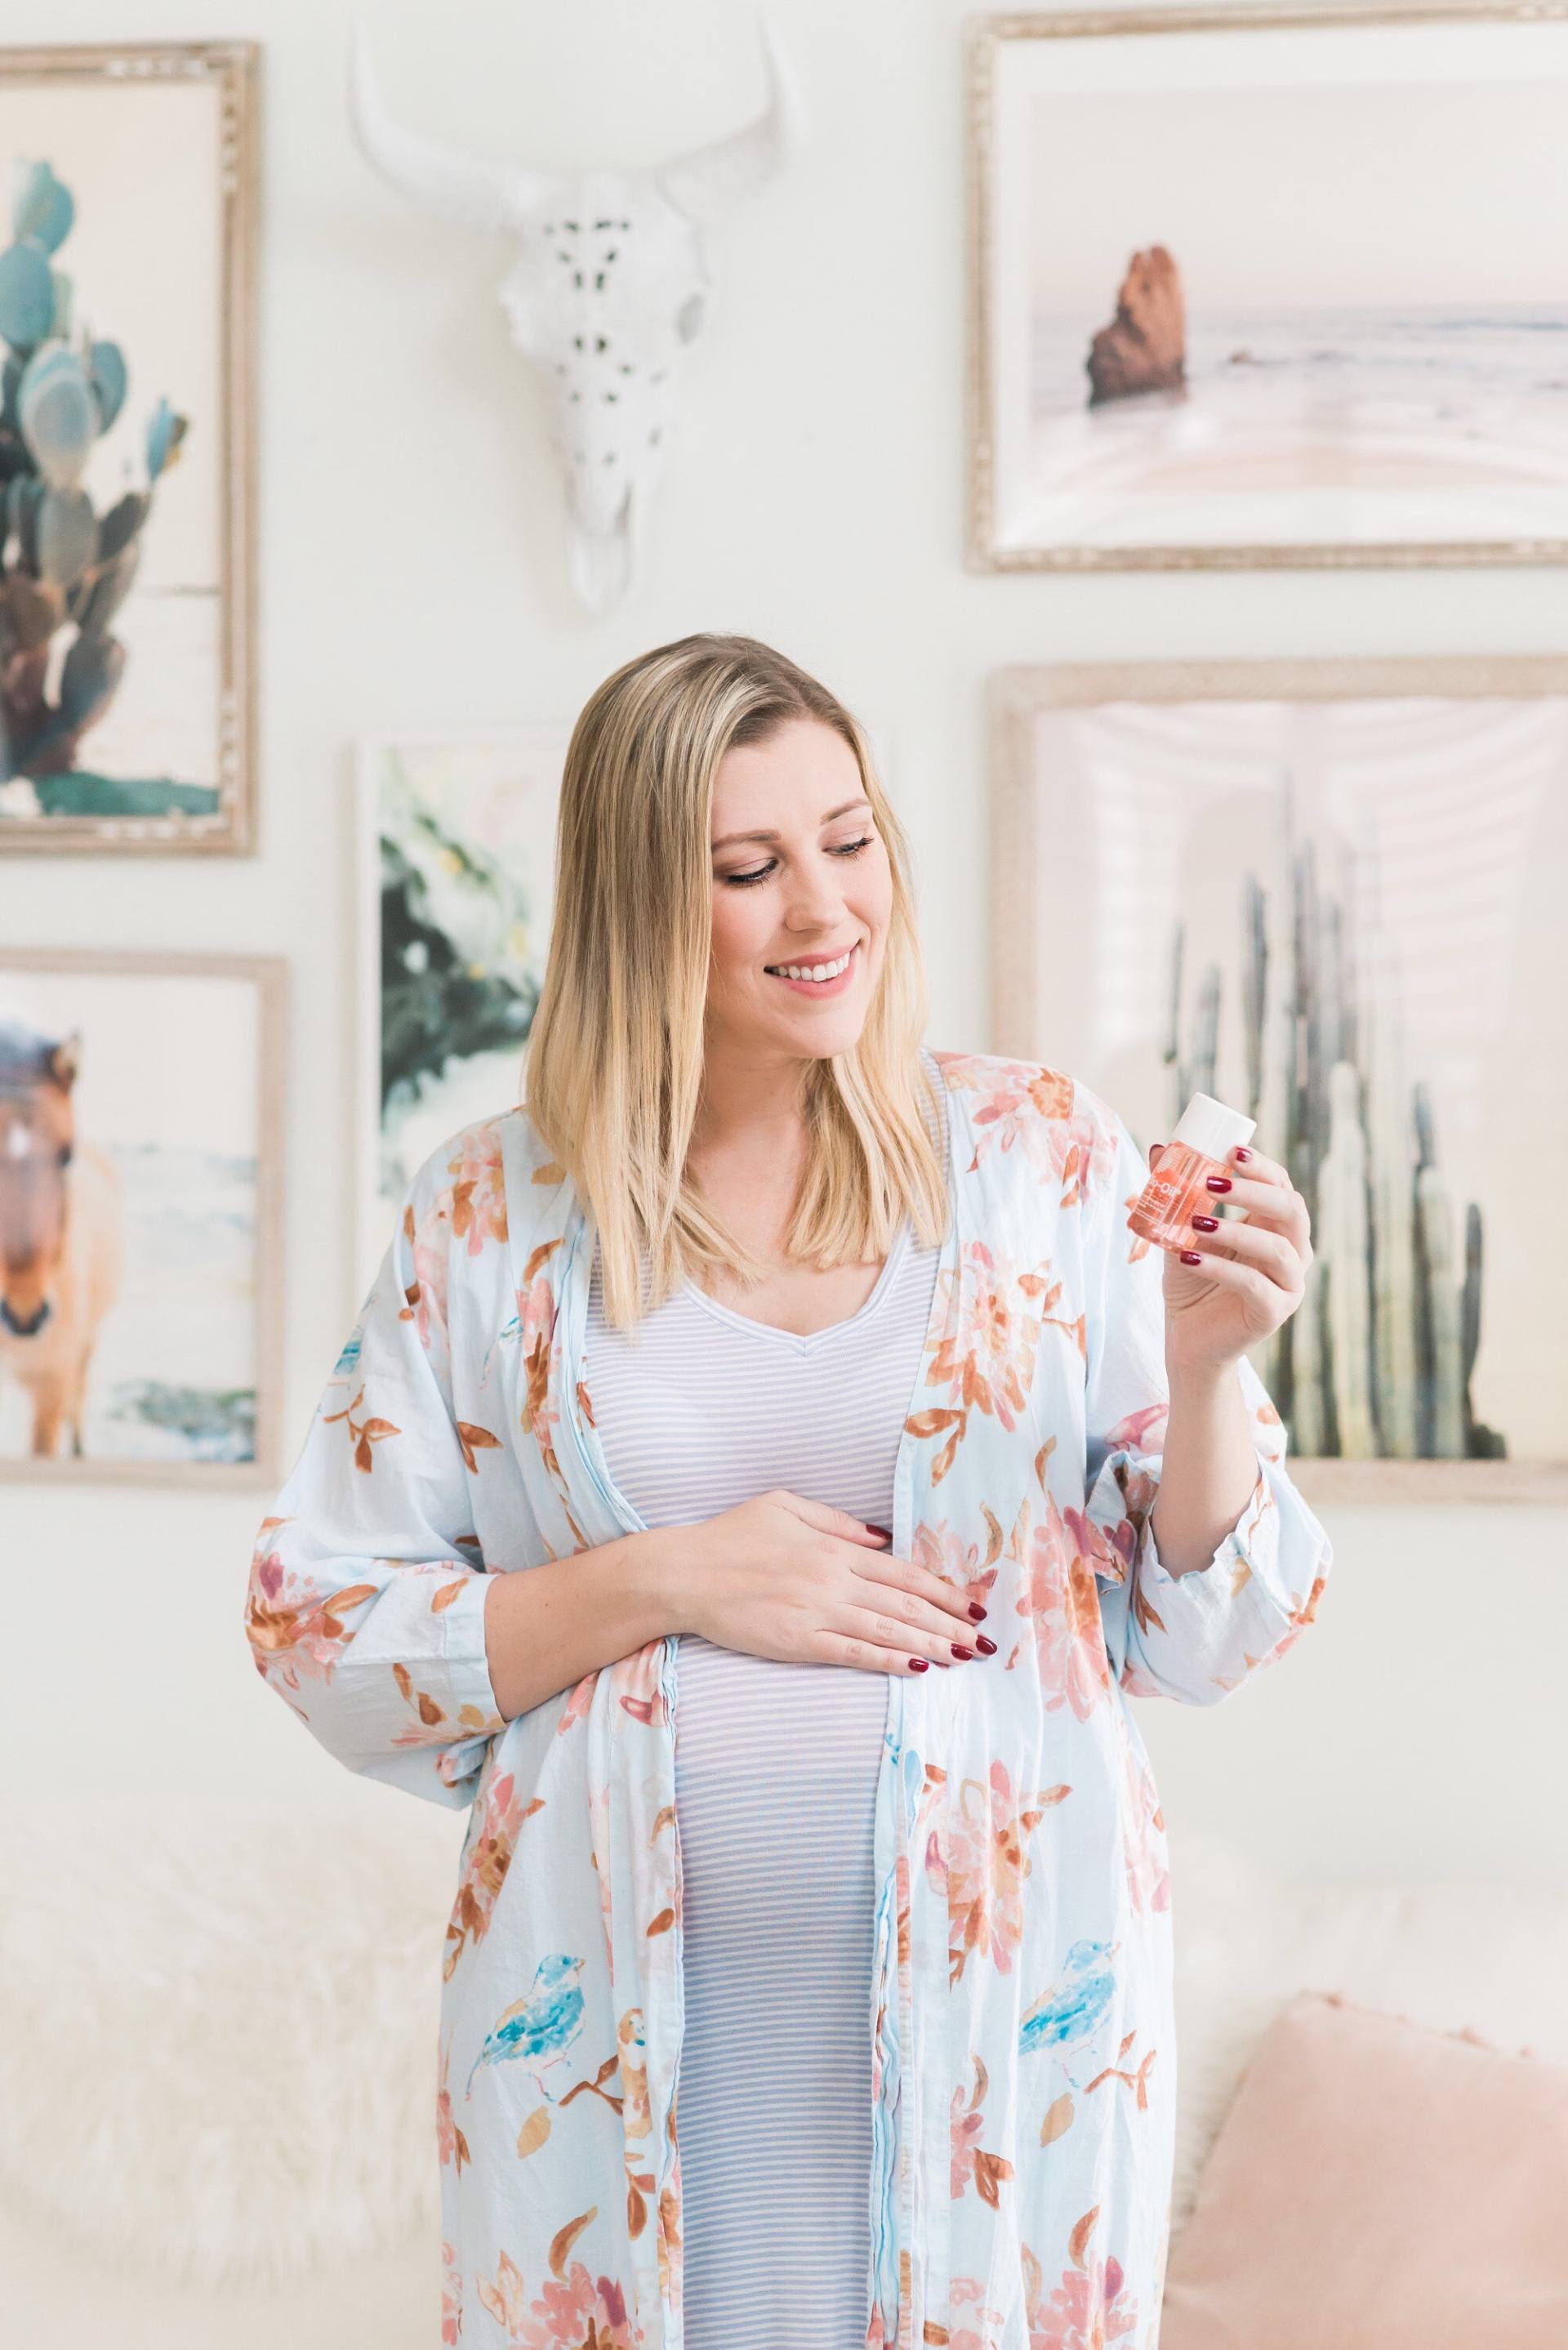 The Benefits Of Bio-Oil During Pregnancy